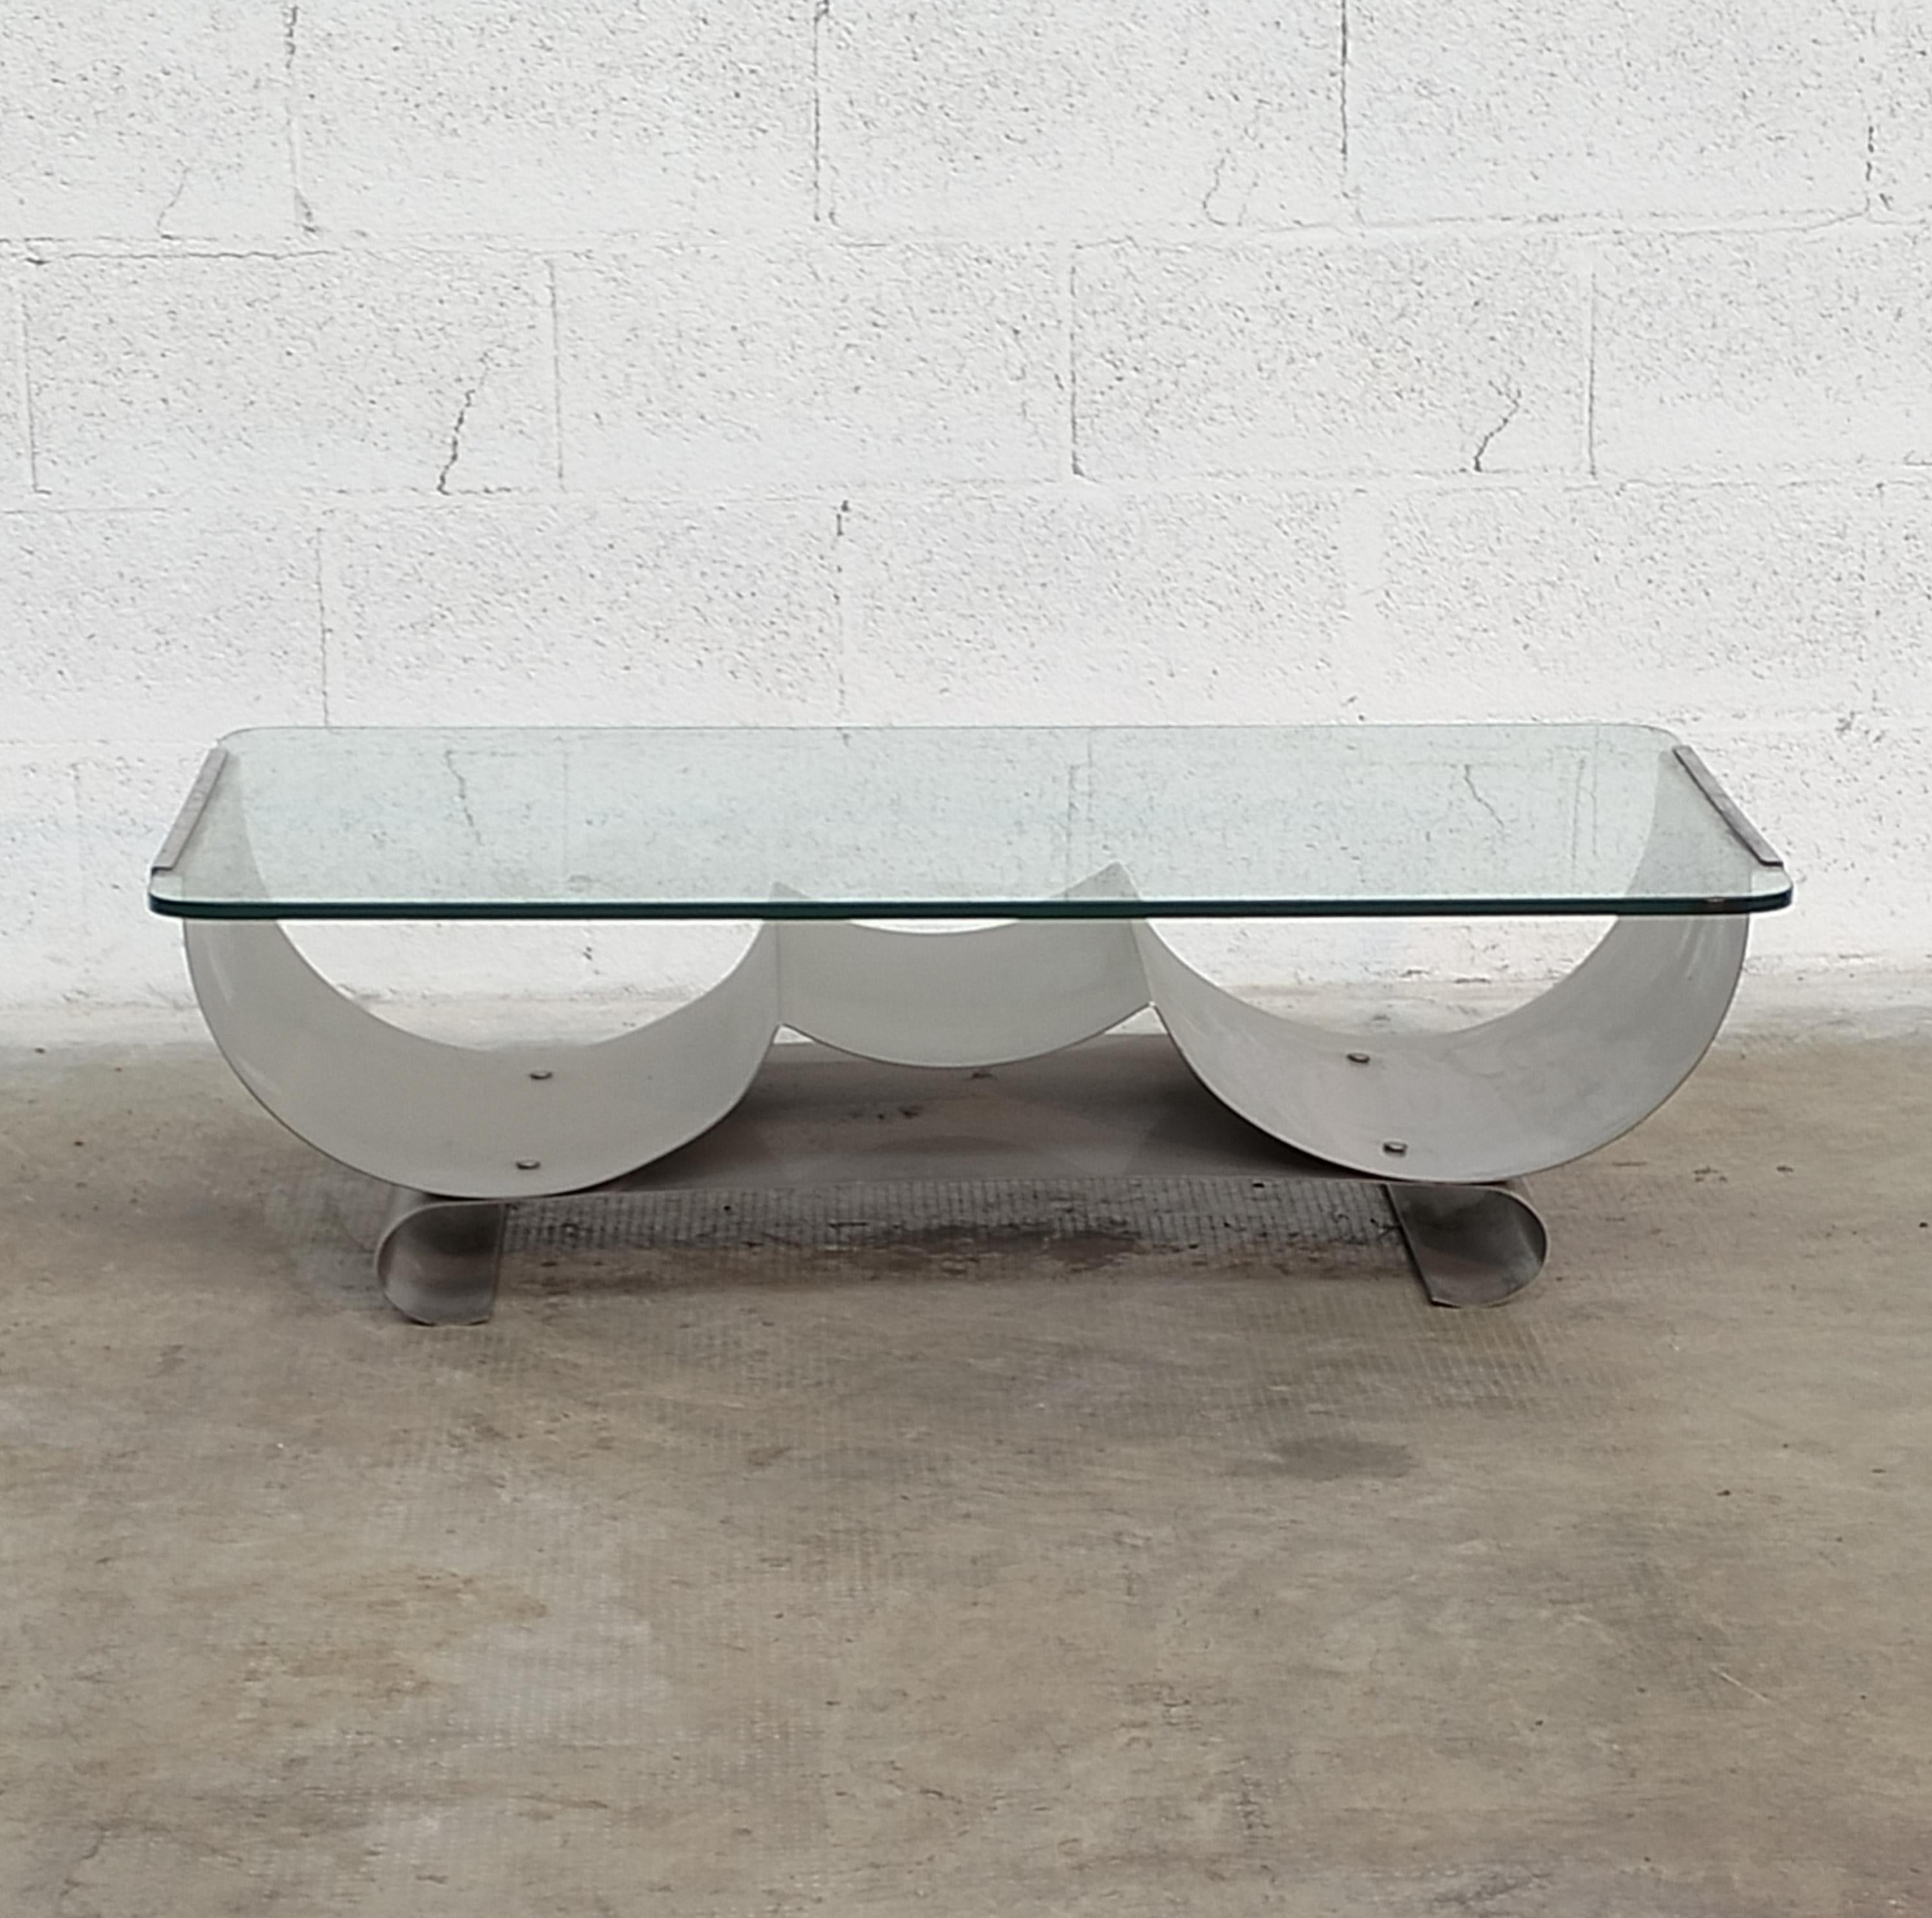 Mid-Century Modern Stainless Steel and Glass Coffee Table by Francois Monnet for Kappa 70s For Sale